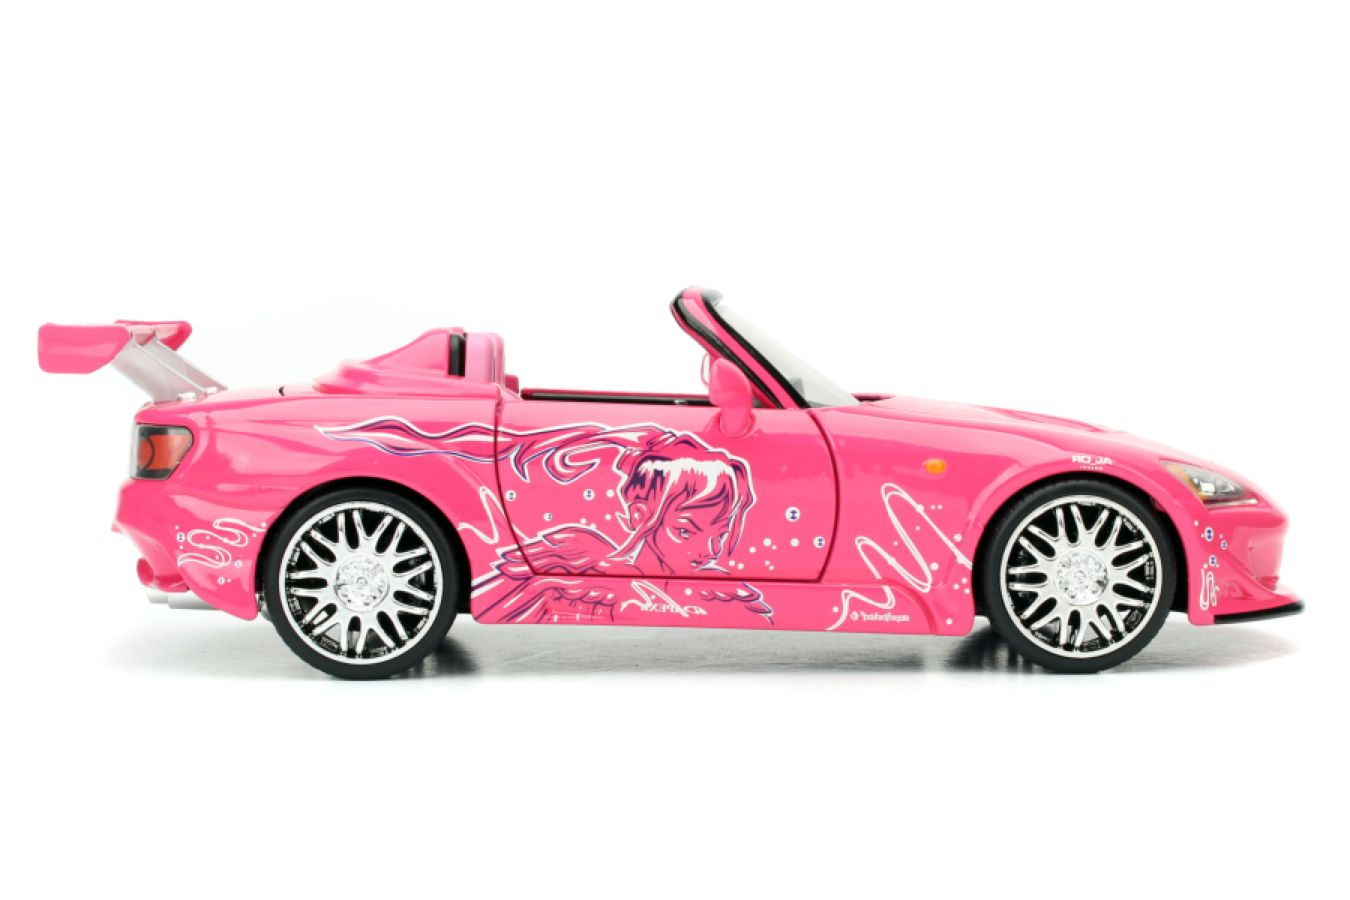 Fast and Furious - Suki's 2001 Honda S2000 1:24 Scale Hollywood Ride